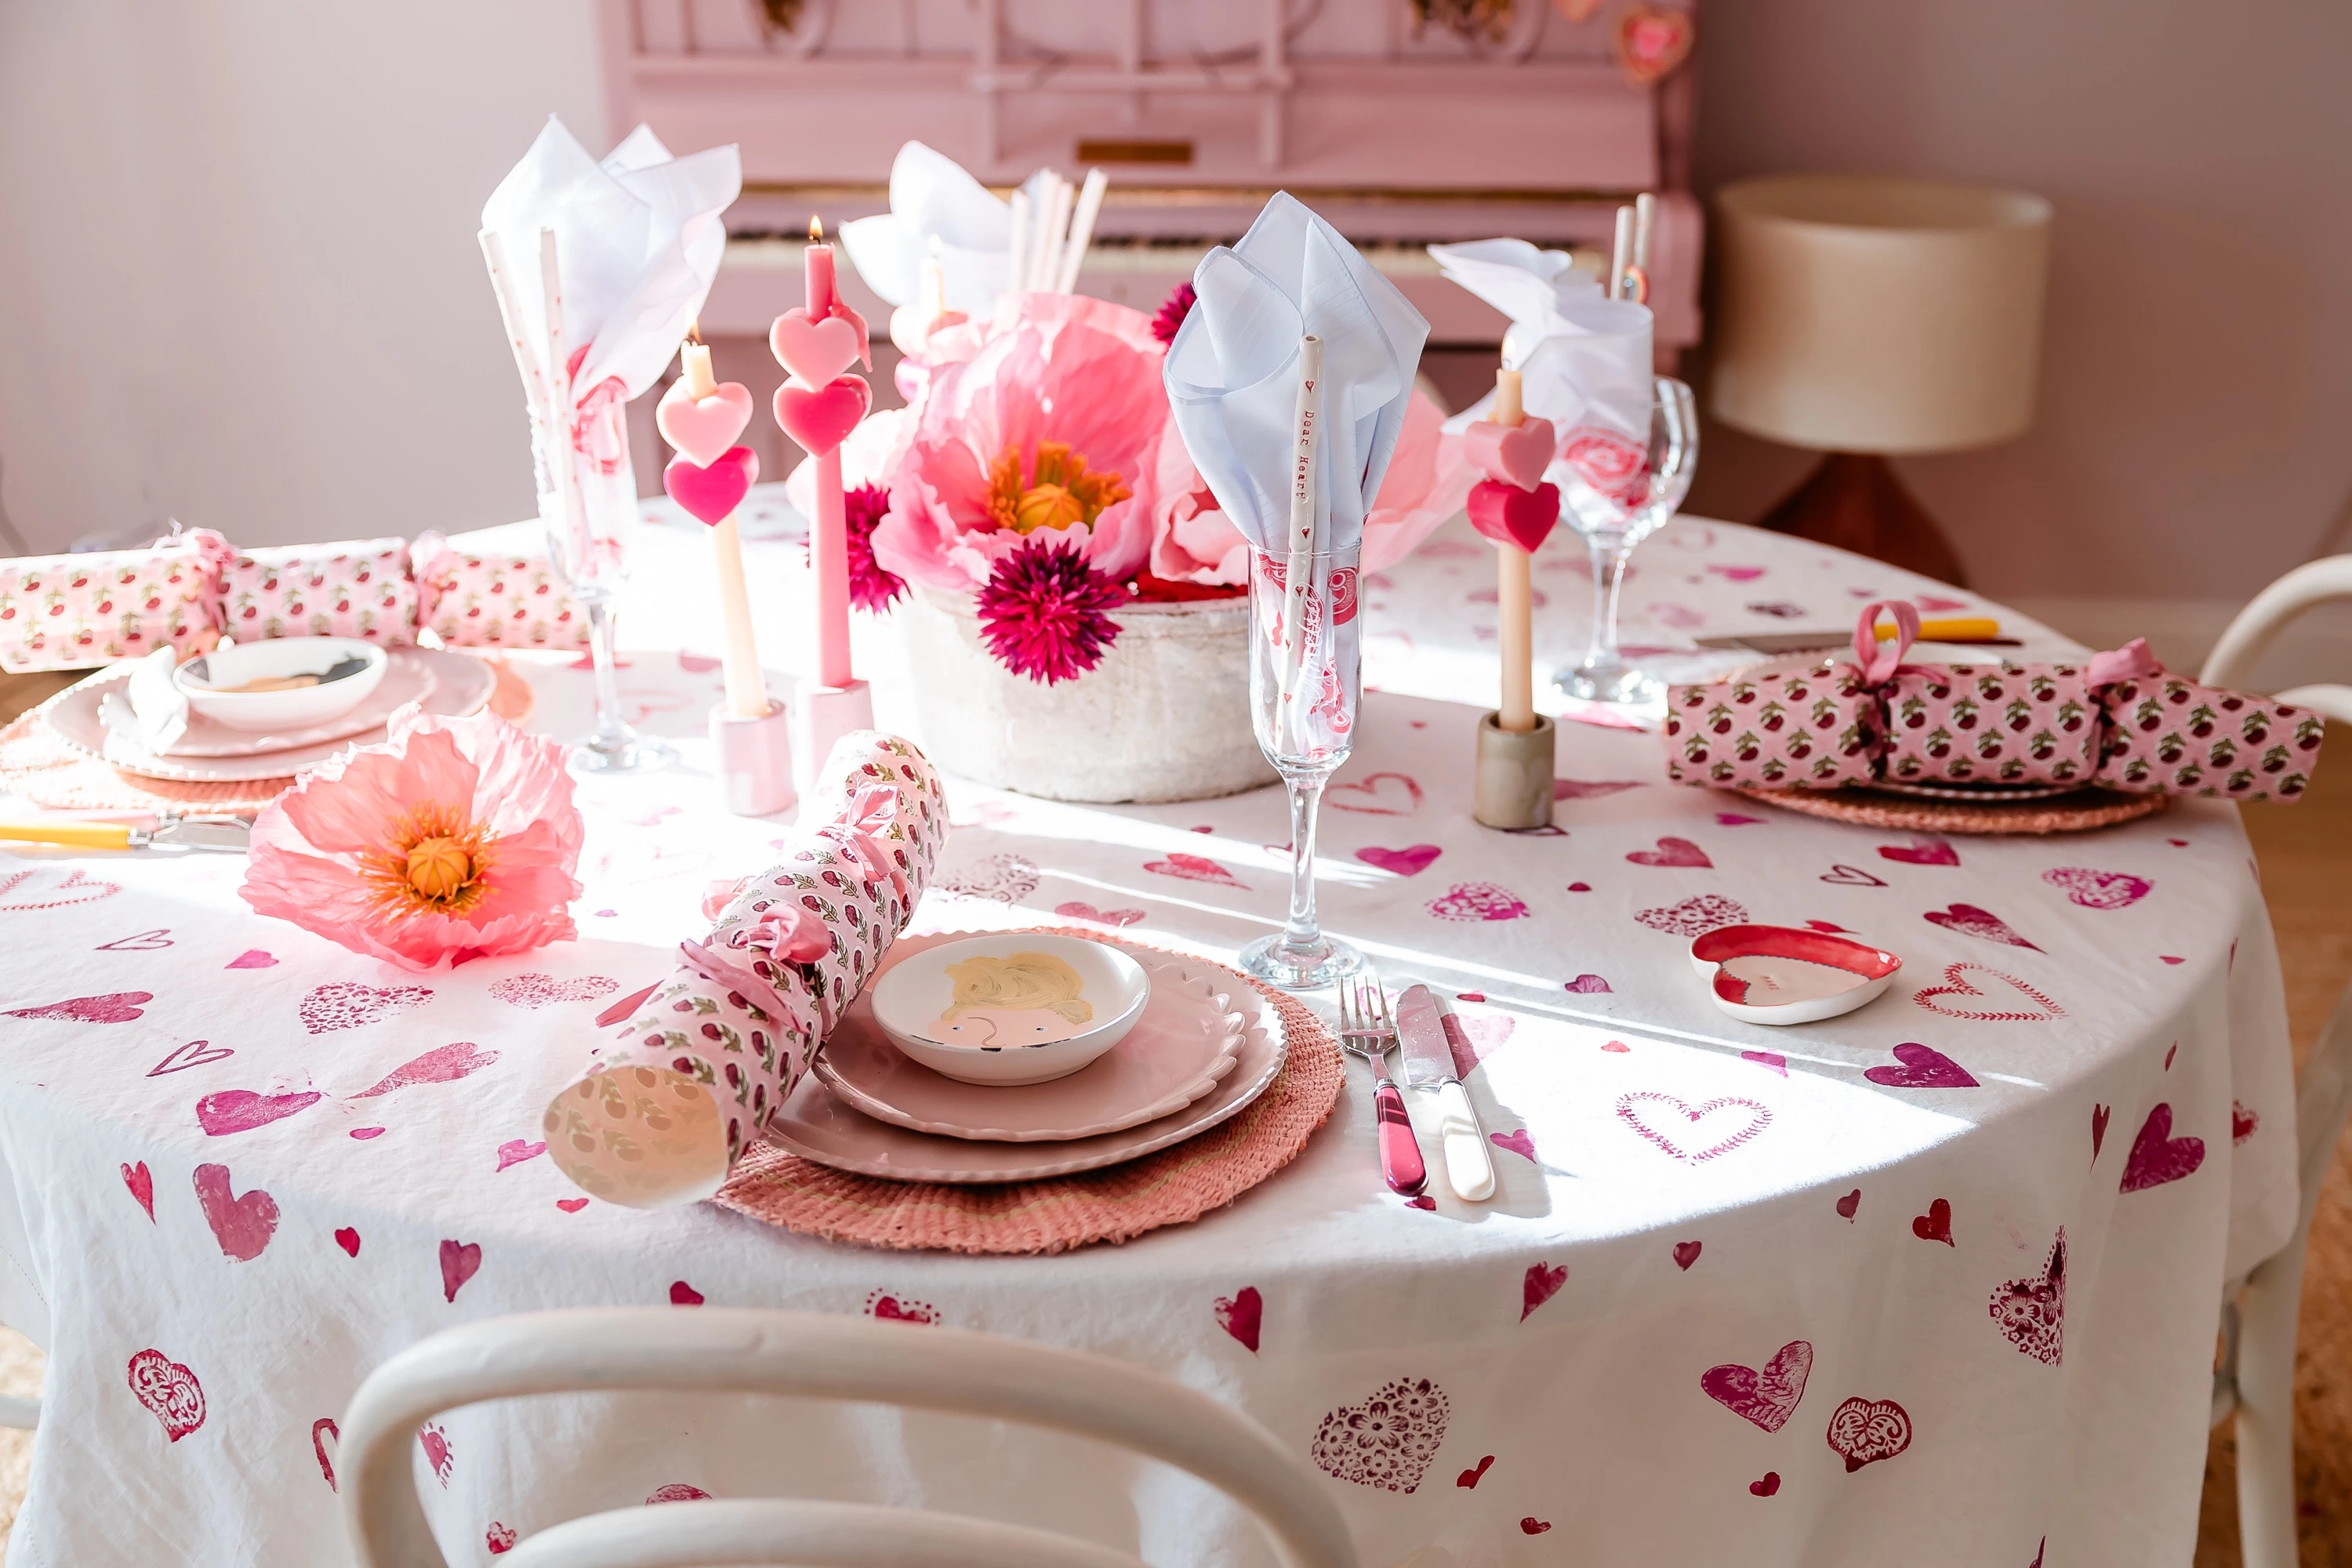 Valentine's Day table settings